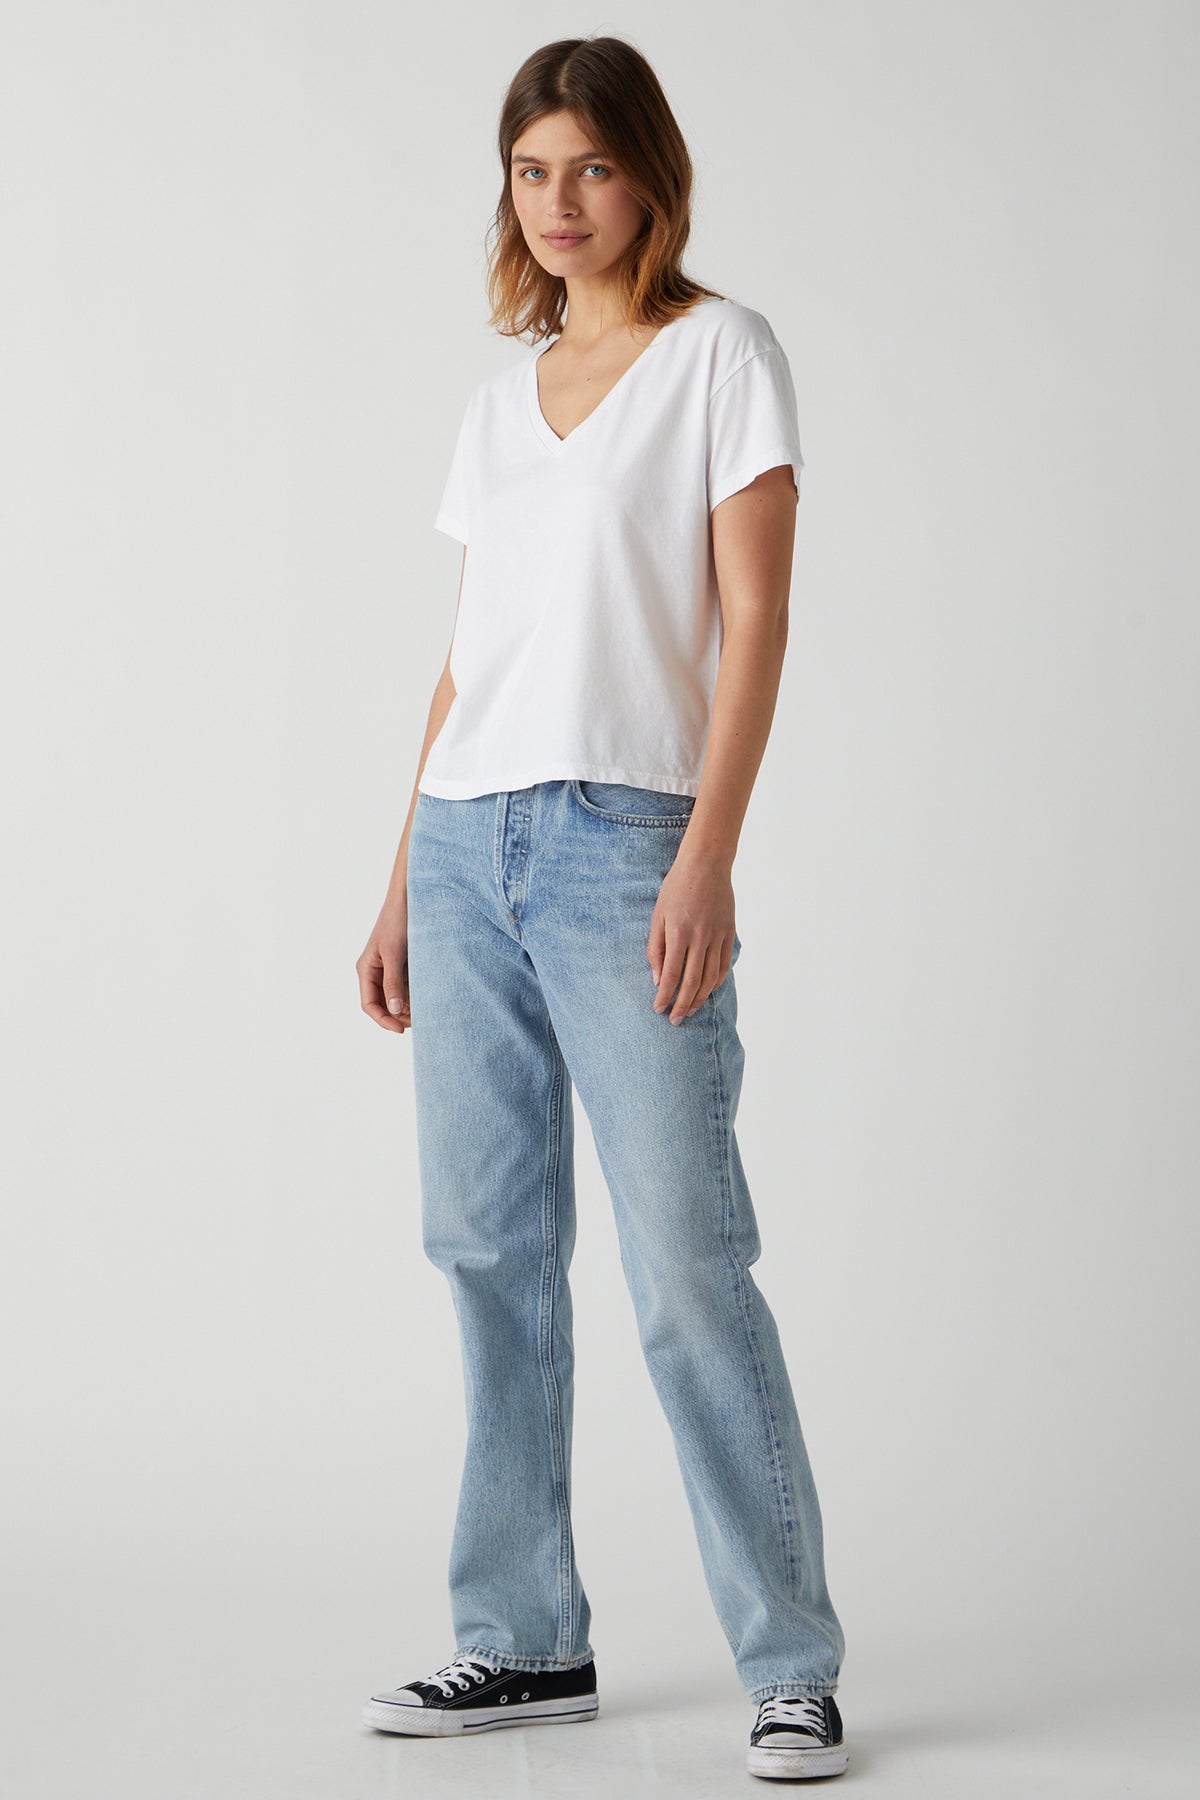 A woman wearing a Velvet by Jenny Graham VENICE TEE and jeans.-25484402950337